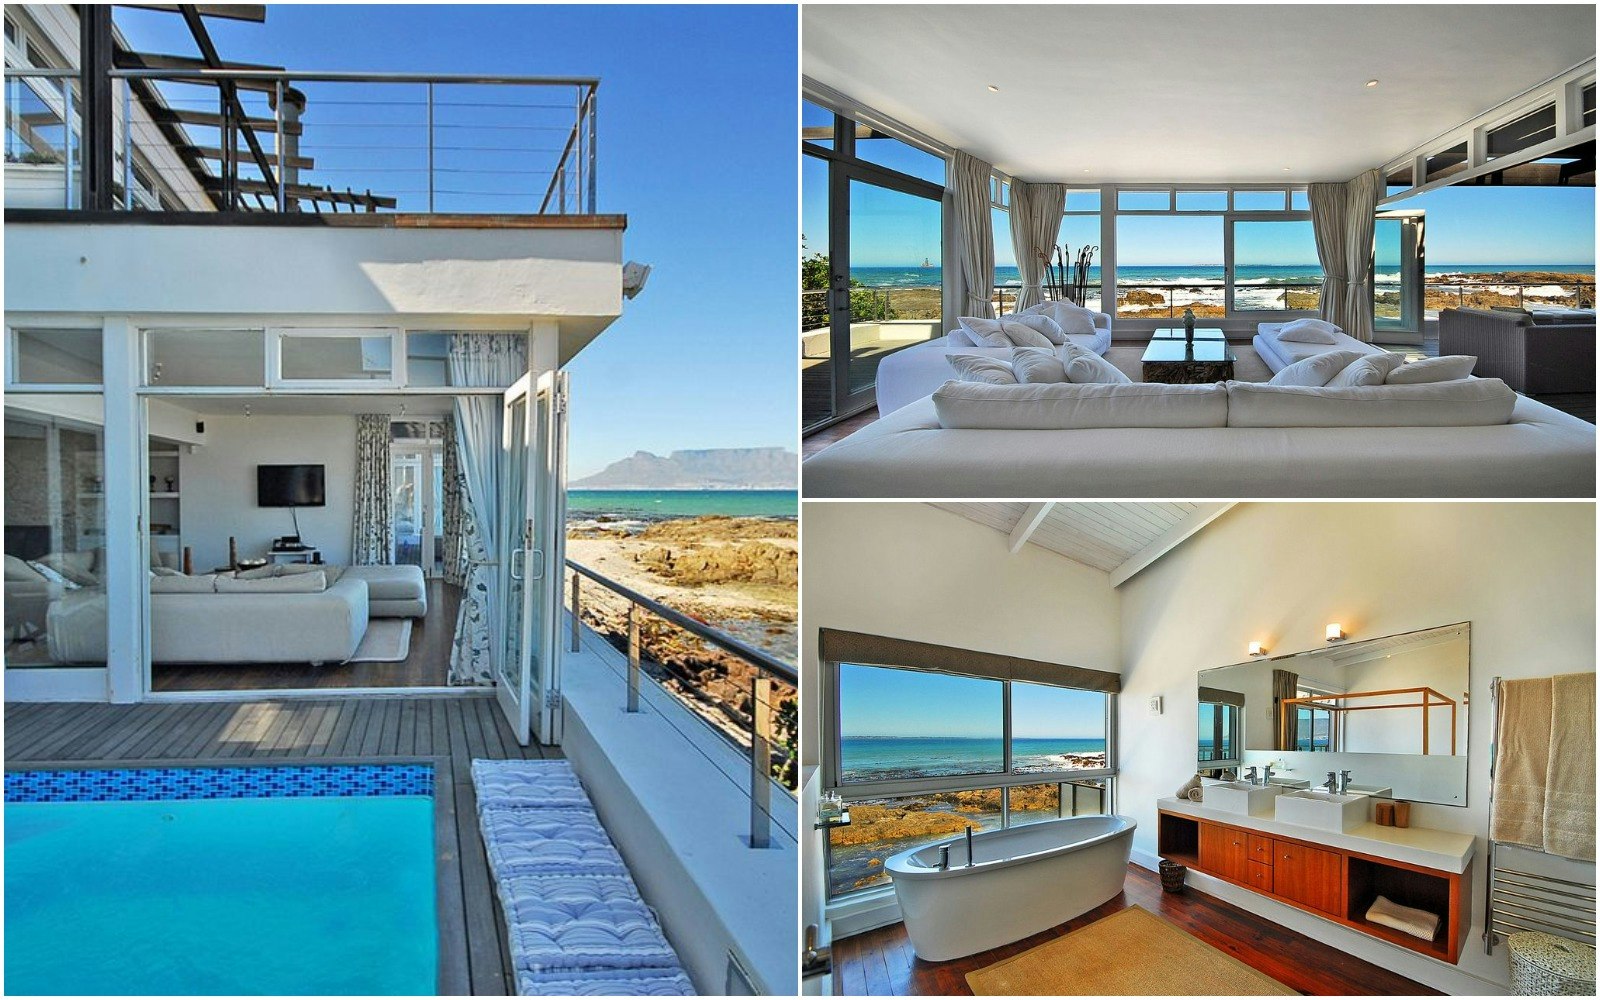 A beach house in Cape Town with views of its pool